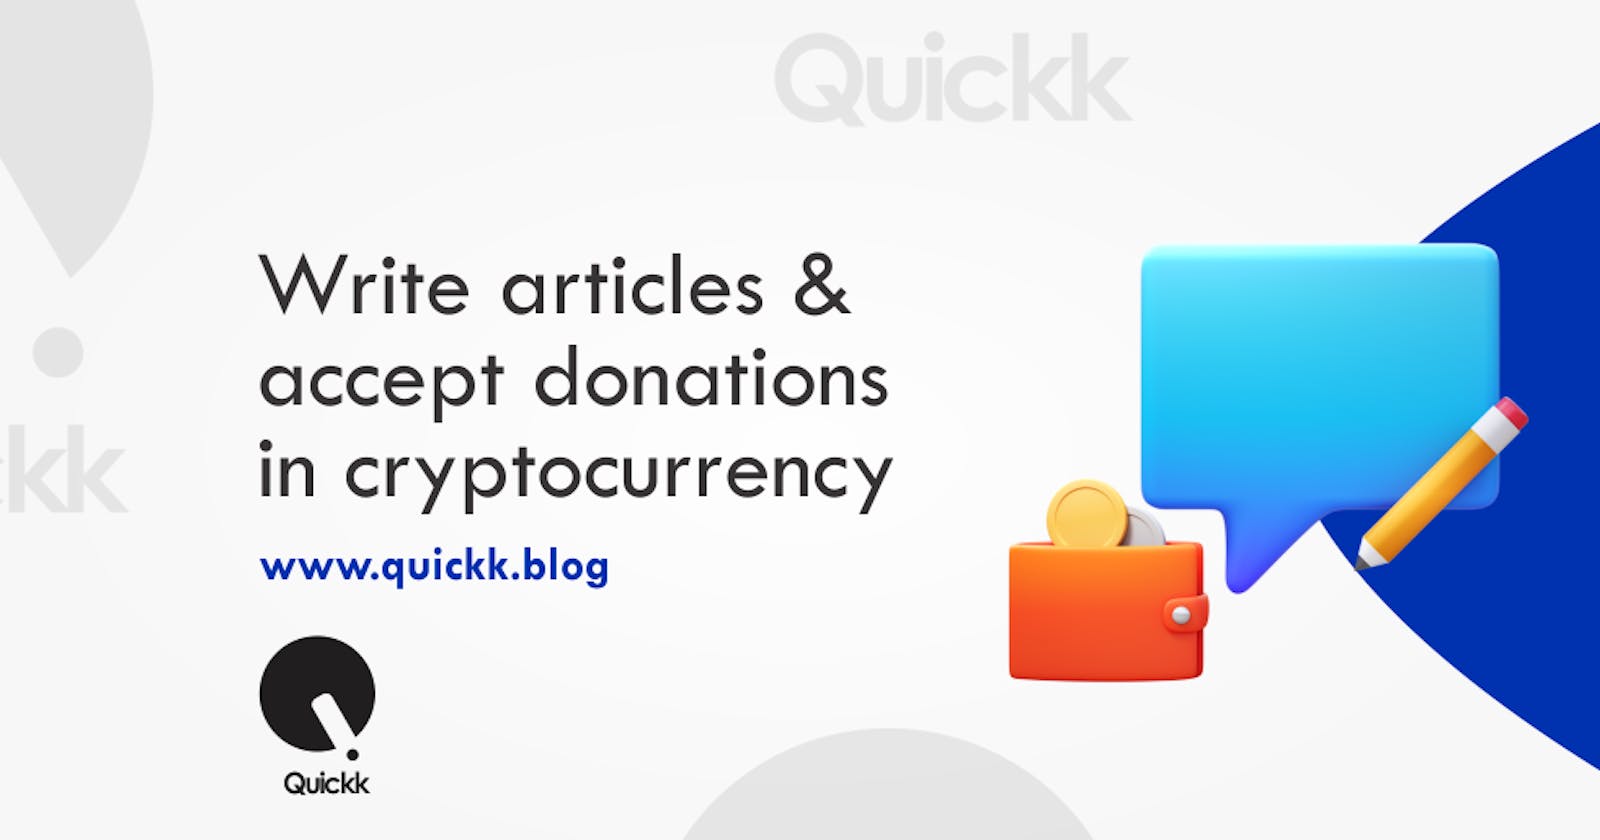 Quickk: Write articles and accept donations in cryptocurrency